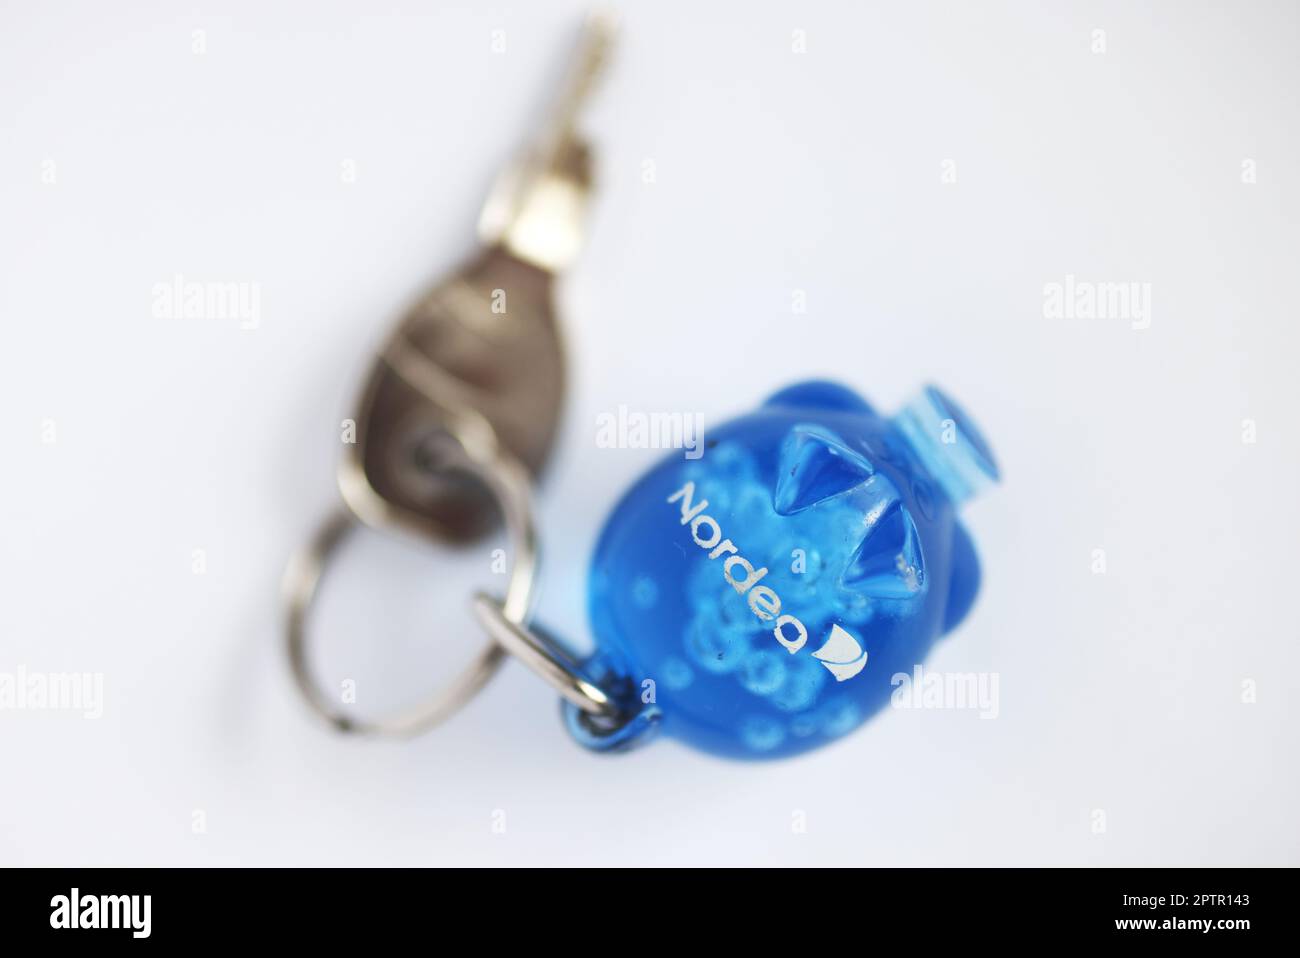 Signs and symbols, a key ring with a Nordea logo on it Stock Photo - Alamy